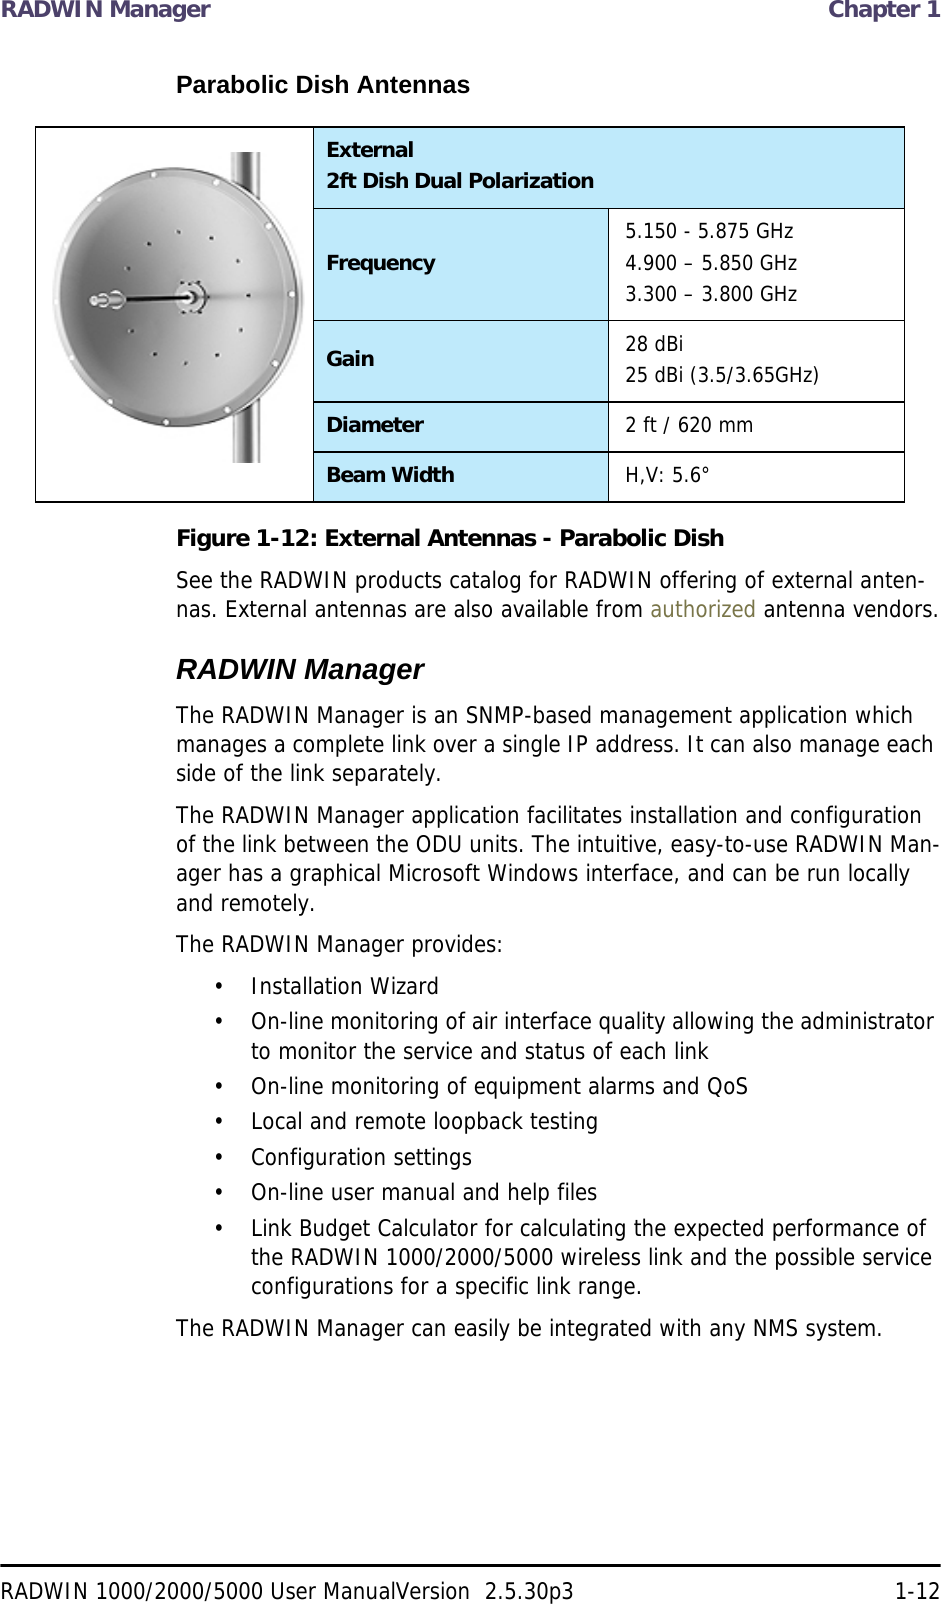 RADWIN Manager  Chapter 1RADWIN 1000/2000/5000 User ManualVersion  2.5.30p3 1-12Parabolic Dish AntennasFigure 1-12: External Antennas - Parabolic DishSee the RADWIN products catalog for RADWIN offering of external anten-nas. External antennas are also available from authorized antenna vendors.RADWIN ManagerThe RADWIN Manager is an SNMP-based management application which manages a complete link over a single IP address. It can also manage each side of the link separately.The RADWIN Manager application facilitates installation and configuration of the link between the ODU units. The intuitive, easy-to-use RADWIN Man-ager has a graphical Microsoft Windows interface, and can be run locally and remotely. The RADWIN Manager provides:• Installation Wizard• On-line monitoring of air interface quality allowing the administrator to monitor the service and status of each link• On-line monitoring of equipment alarms and QoS• Local and remote loopback testing• Configuration settings• On-line user manual and help files• Link Budget Calculator for calculating the expected performance of the RADWIN 1000/2000/5000 wireless link and the possible service configurations for a specific link range.The RADWIN Manager can easily be integrated with any NMS system.External2ft Dish Dual PolarizationFrequency 5.150 - 5.875 GHz4.900 – 5.850 GHz3.300 – 3.800 GHzGain 28 dBi25 dBi (3.5/3.65GHz)Diameter 2 ft / 620 mmBeam Width H,V: 5.6°